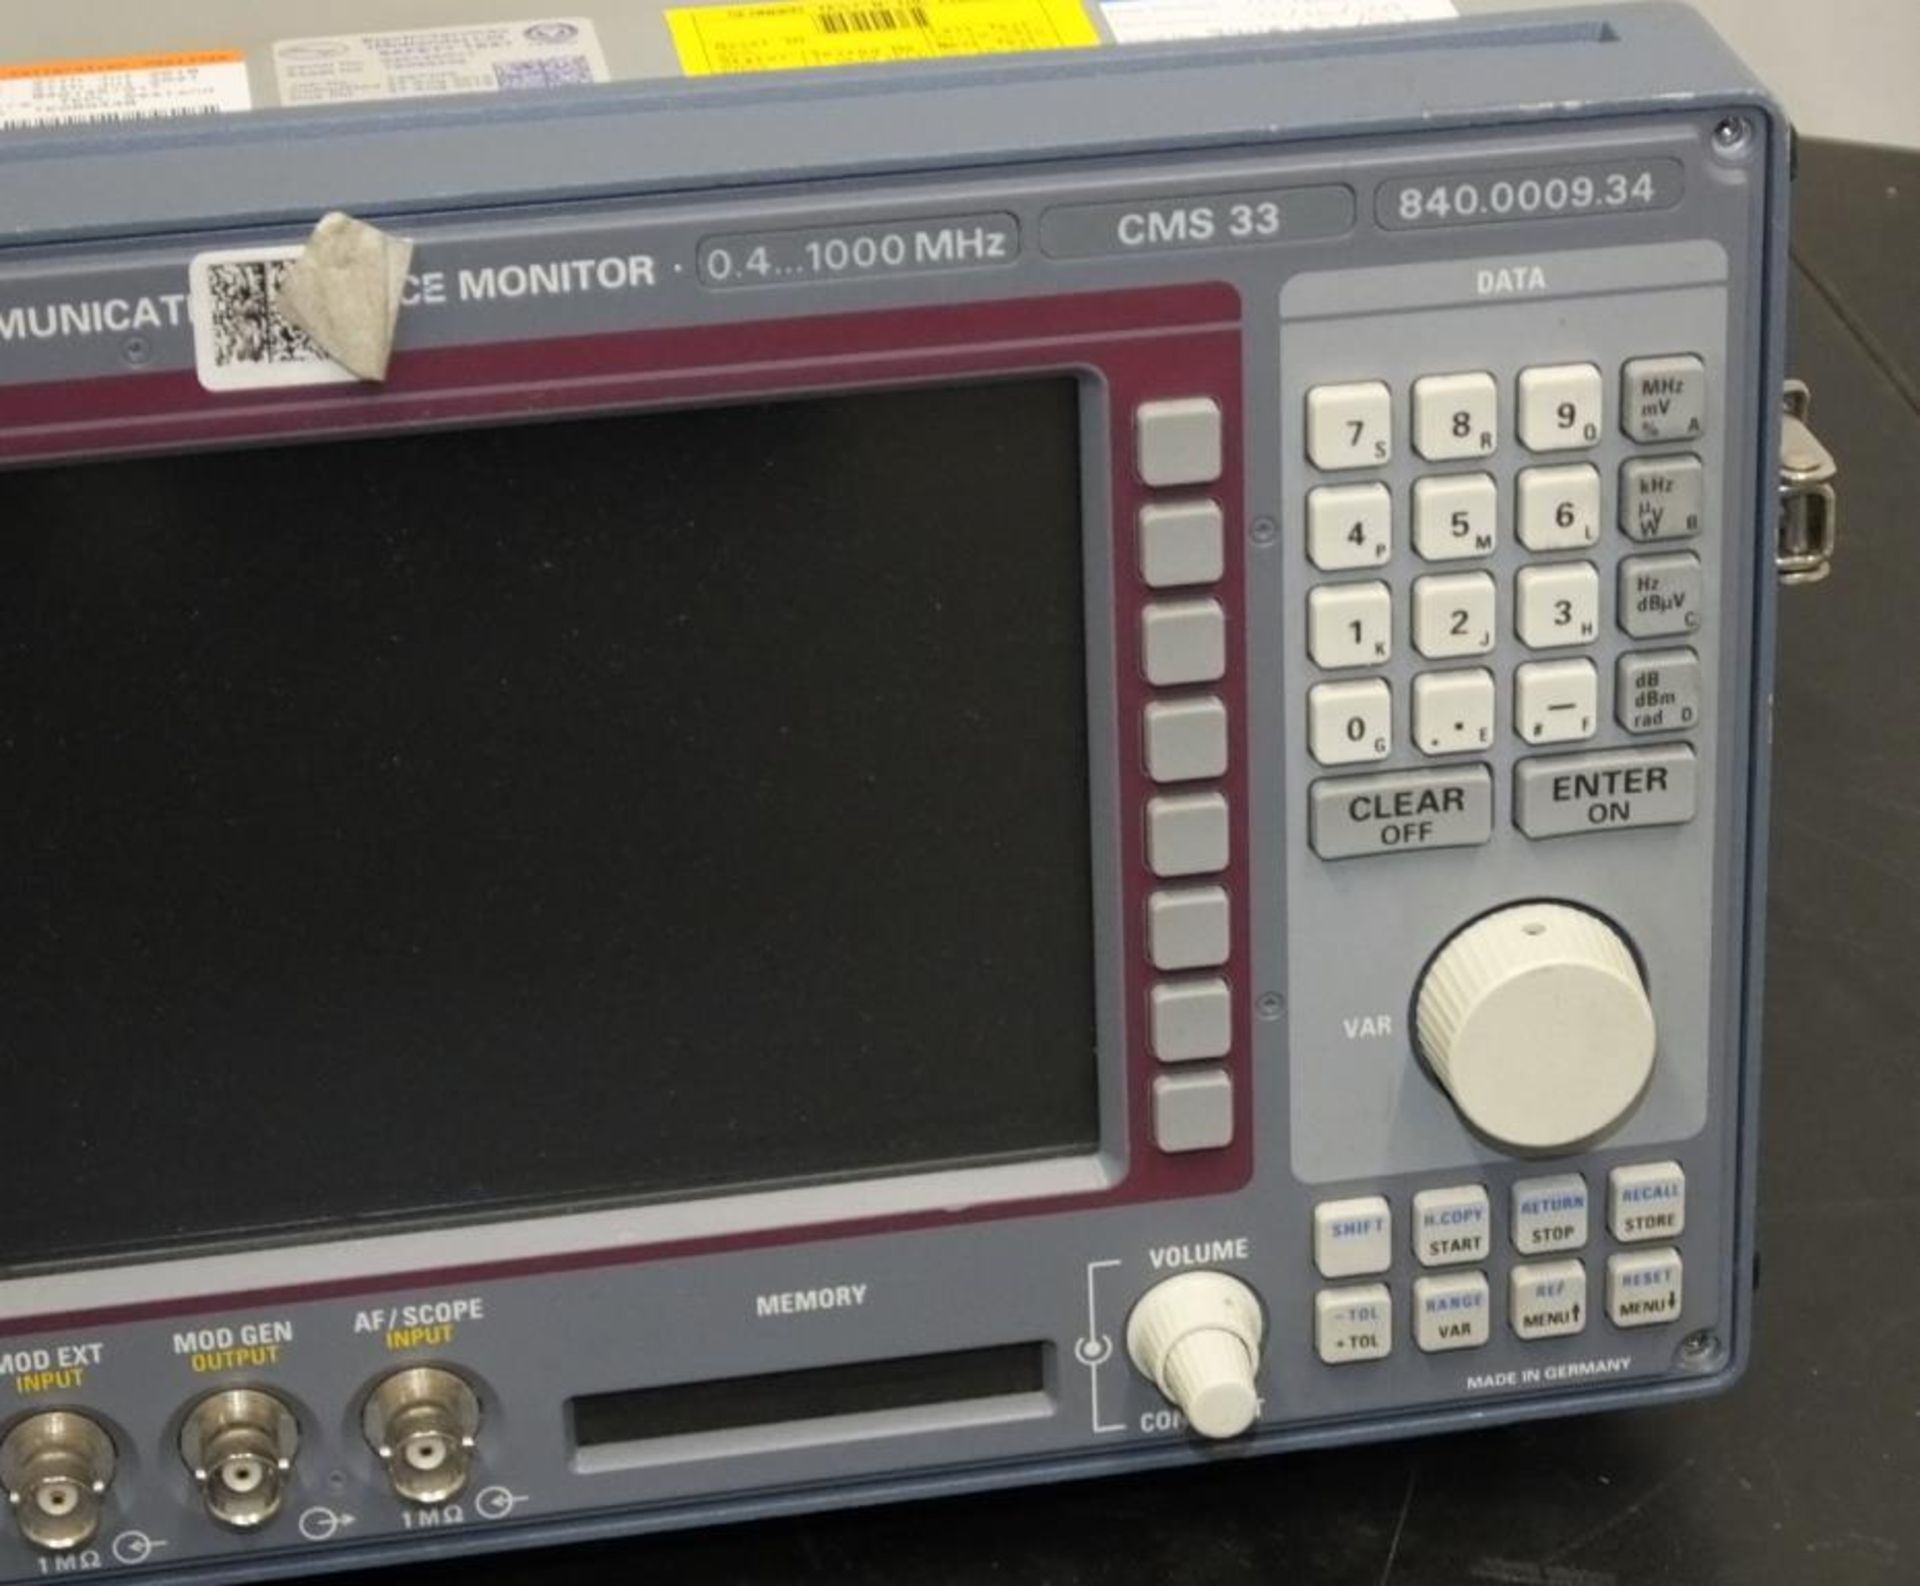 Rohde & Schwarz Radio Communications monitor 0.4 - 1000mhz - CMS33 - 840.0009.34 - NO COVER - Image 3 of 7